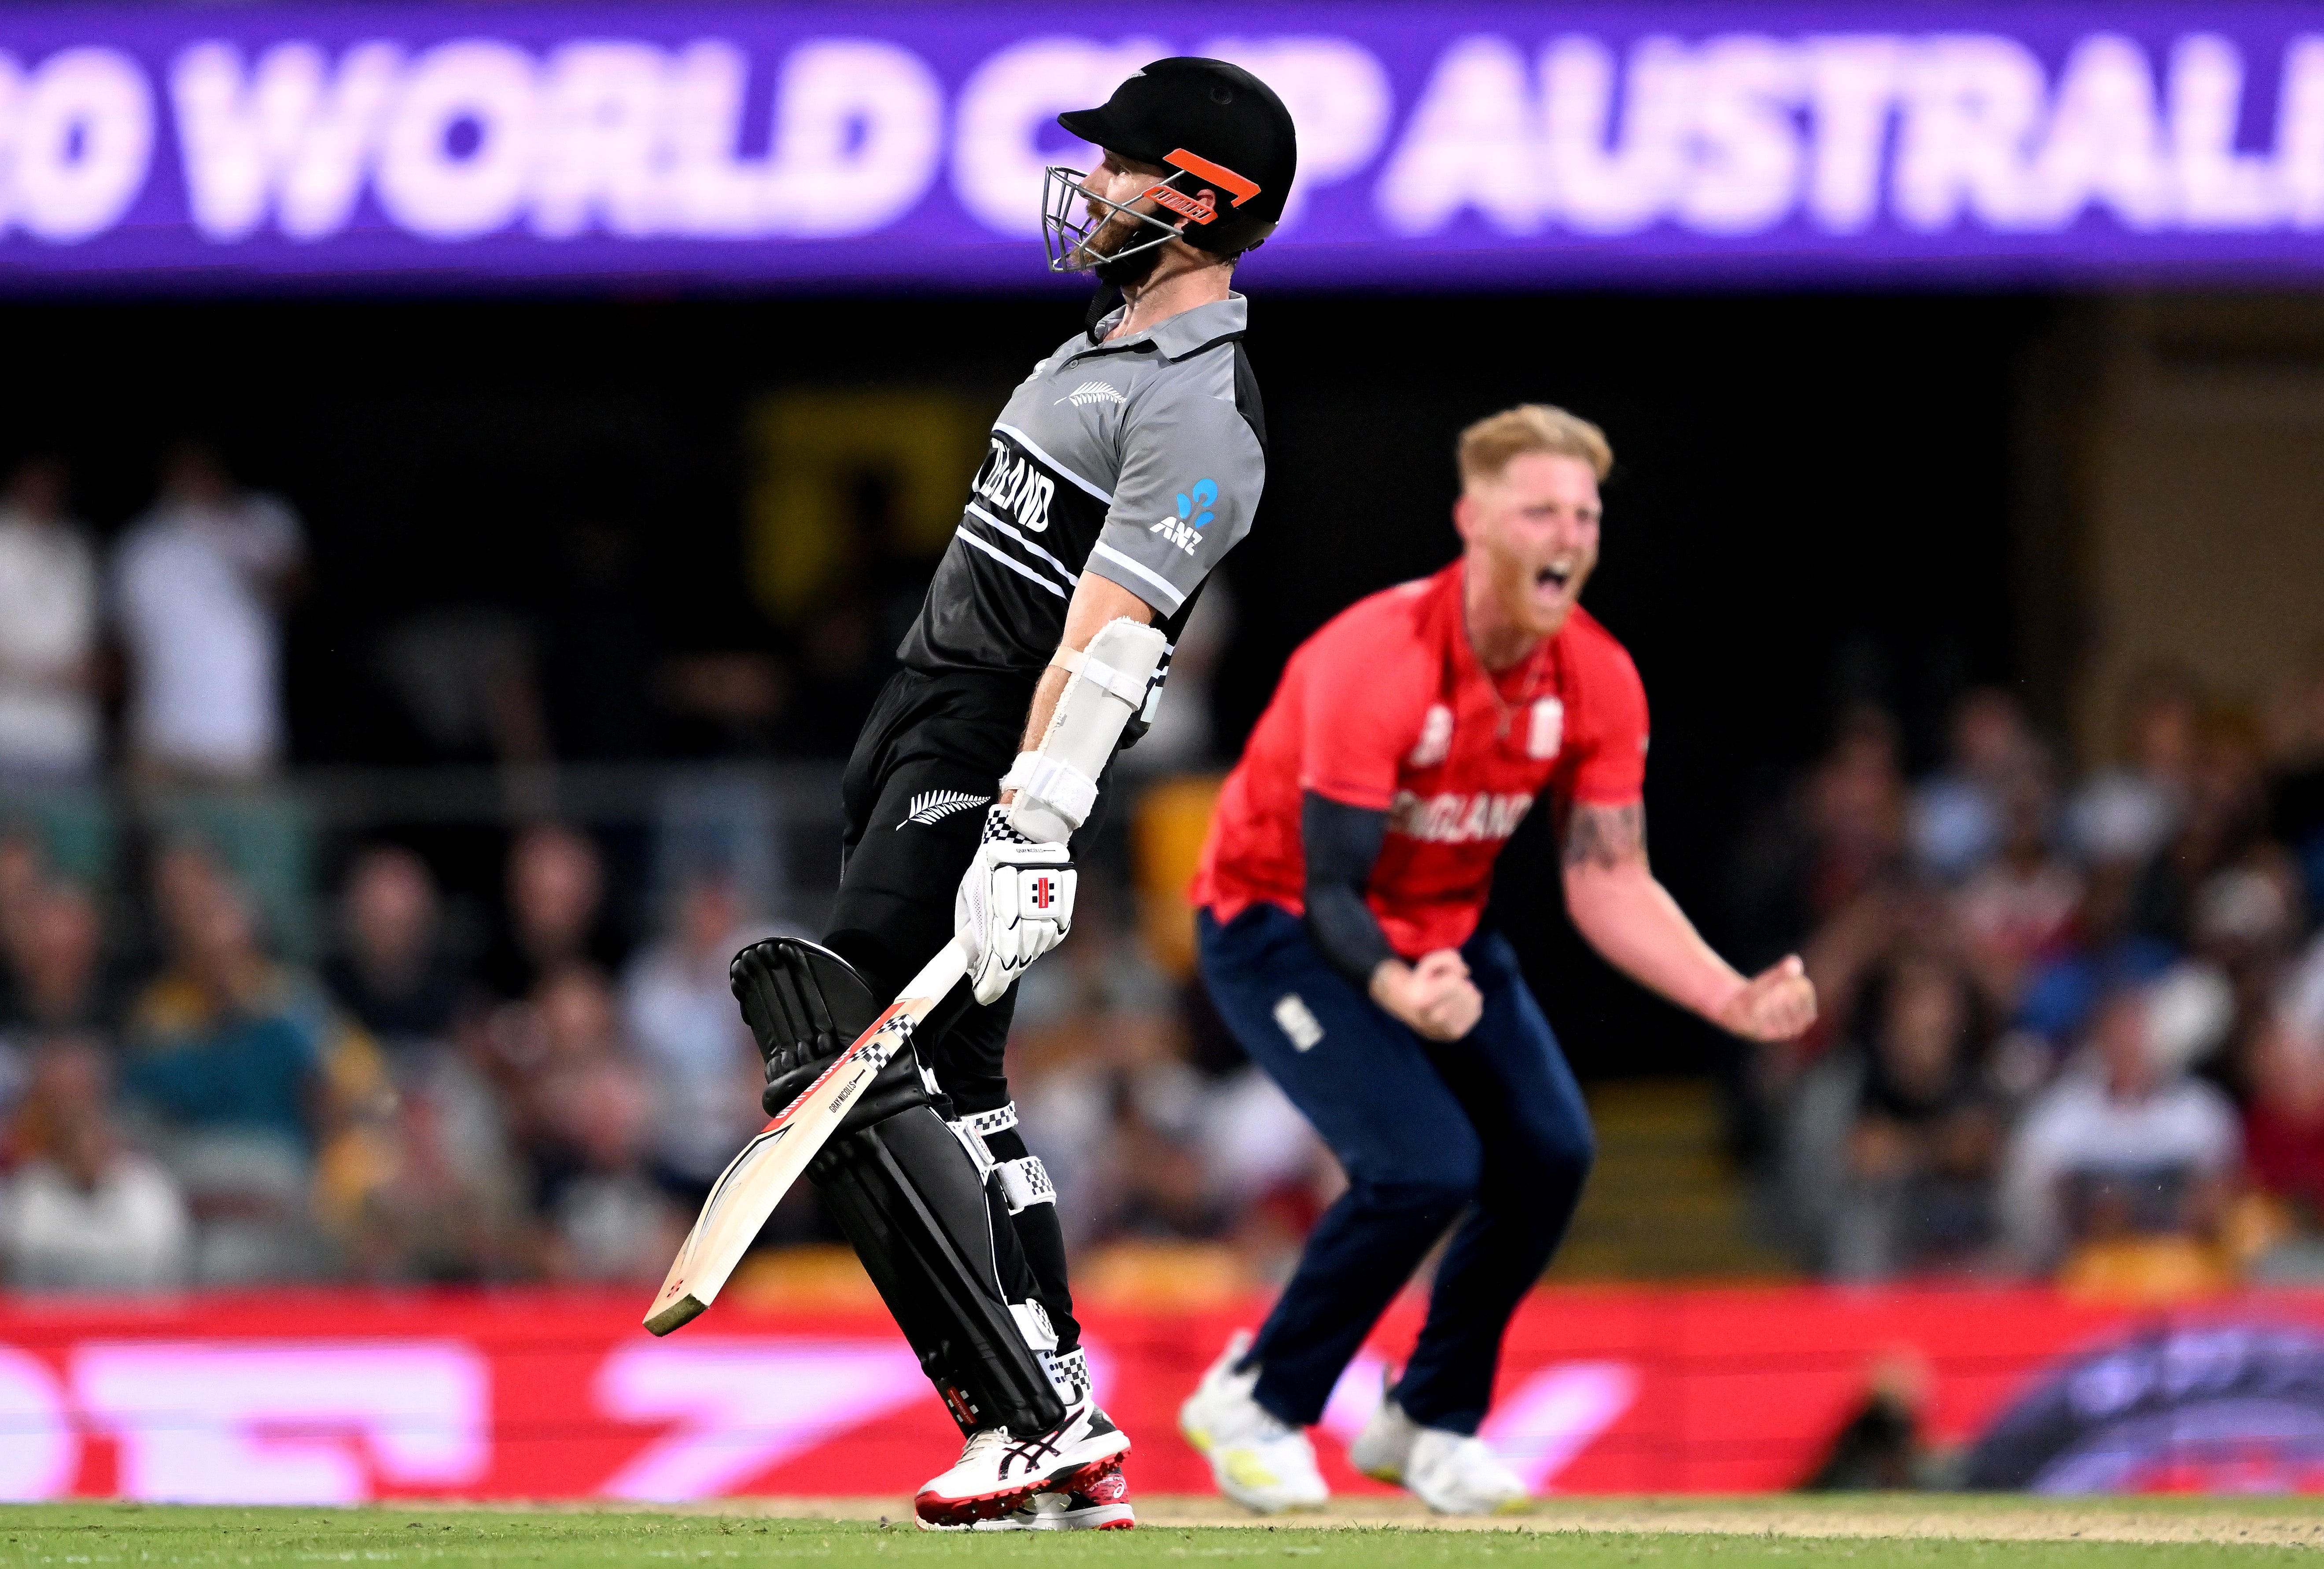 England kept their T20 World Cup hopes alive with a hard-won victory in Brisbane